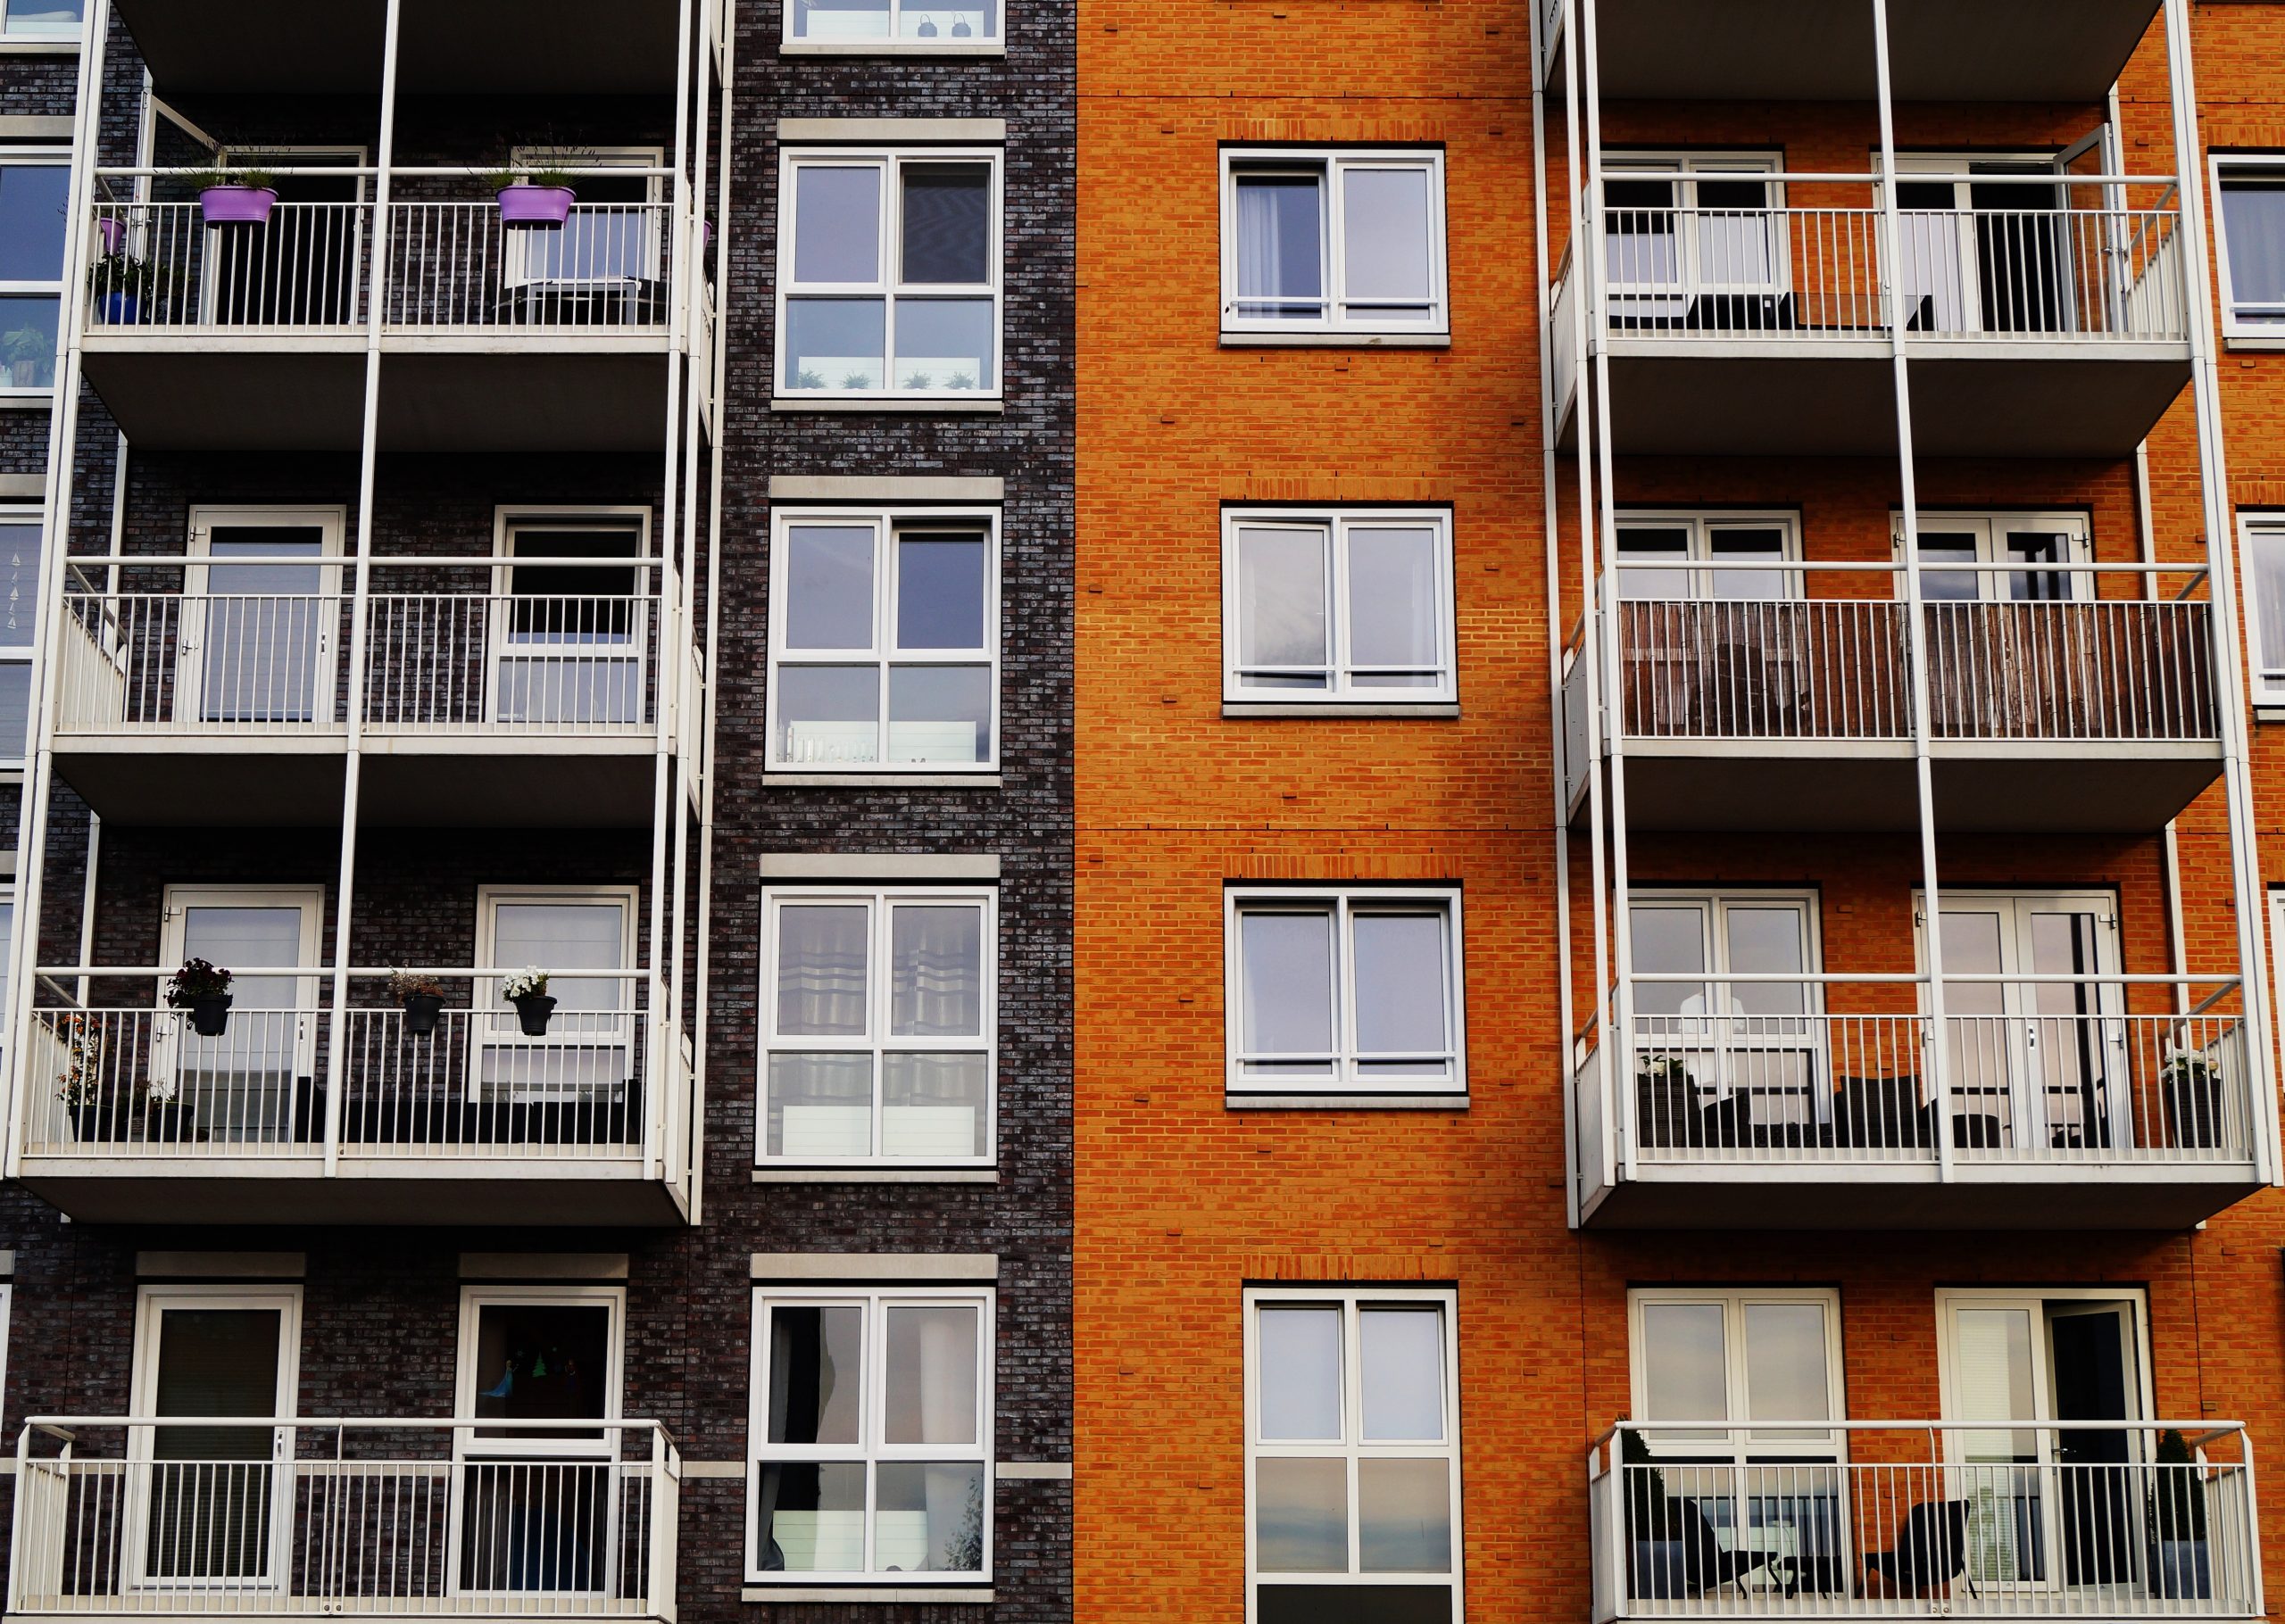 Rights of Tenants living in HMOs.